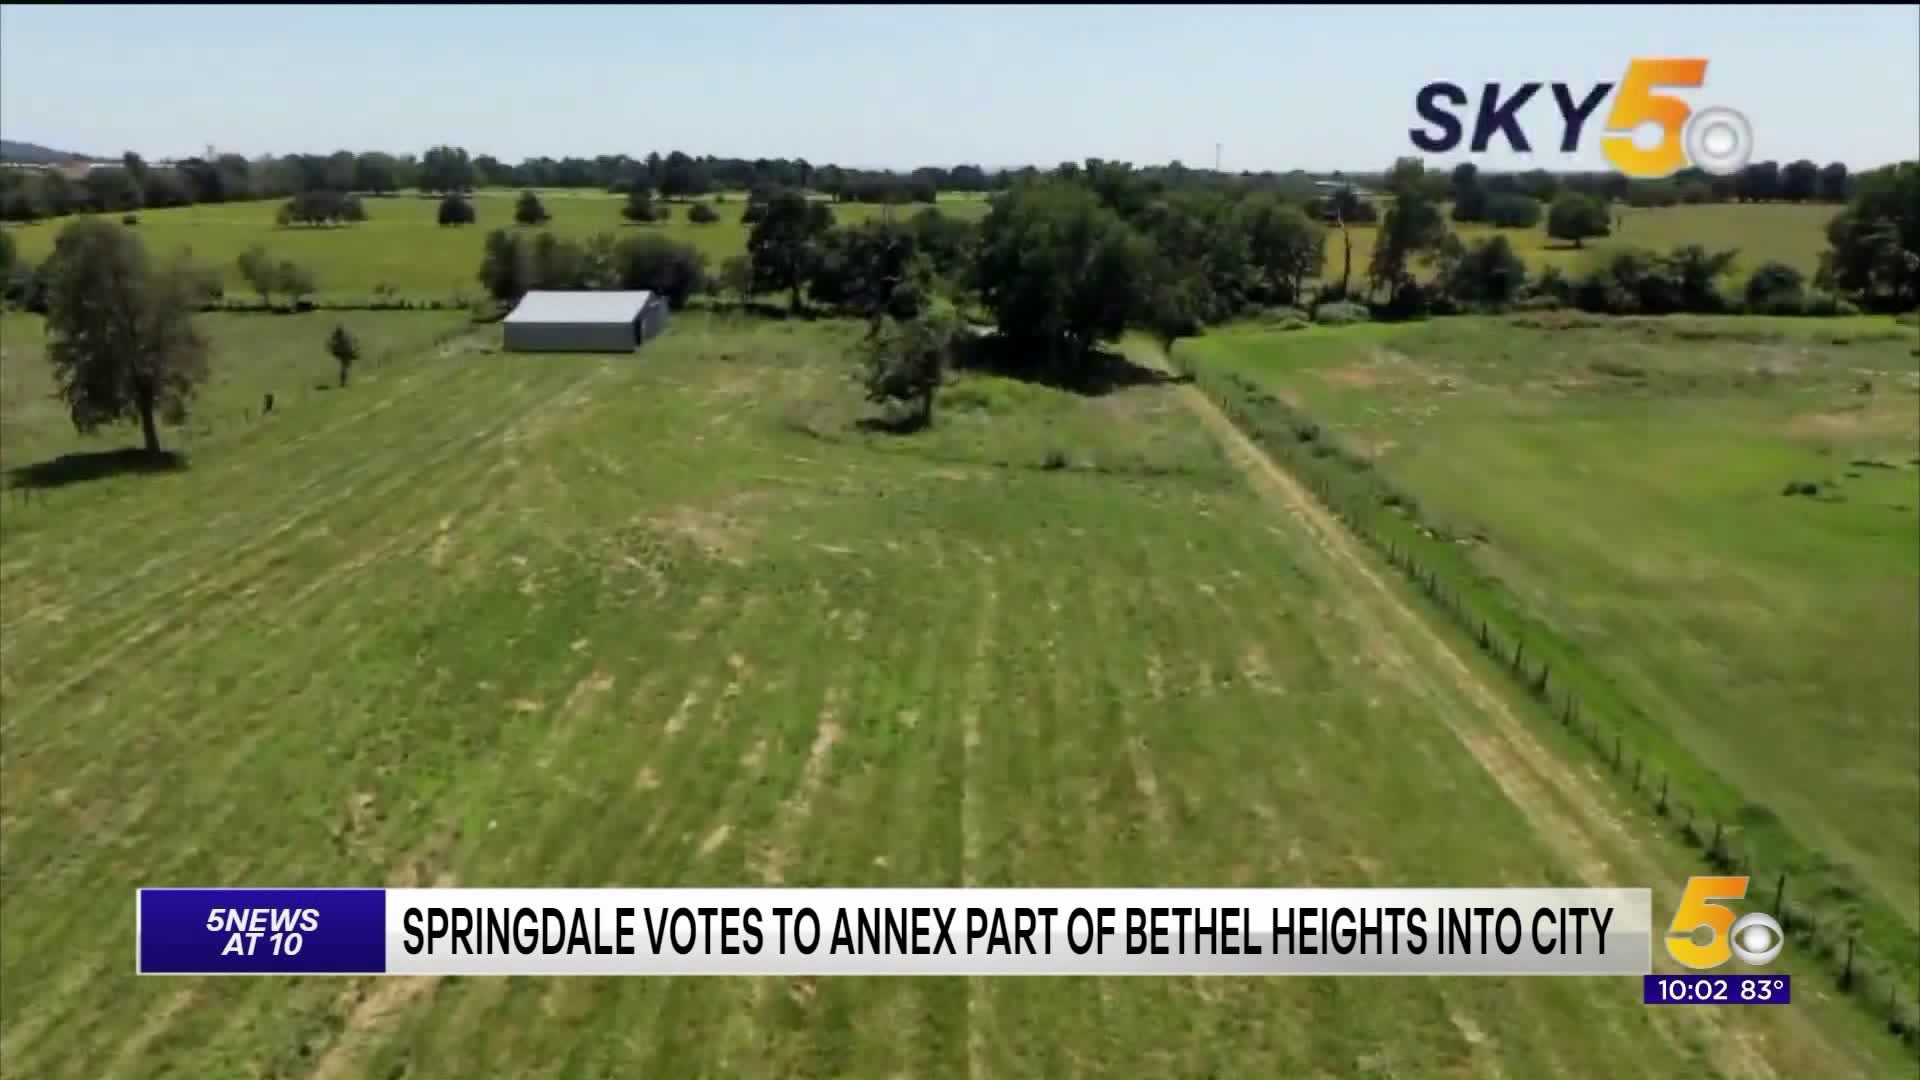 Springdale Votes to Annex Part of Bethel Heights into City